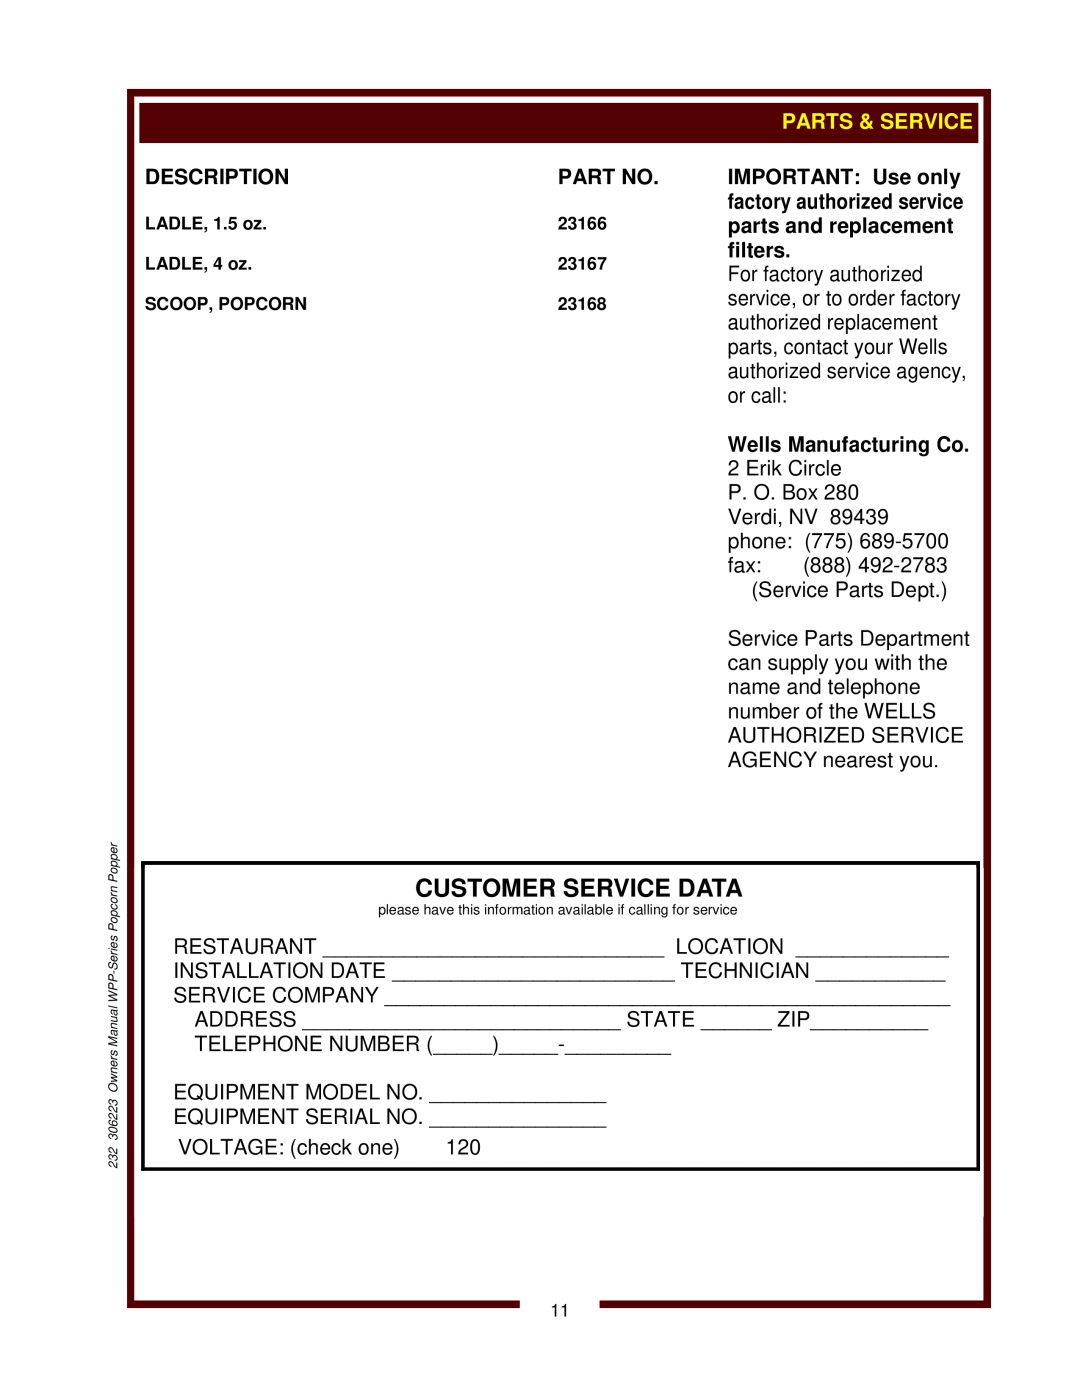 Wells WPP-6, WPP-10 owner manual Customer Service Data, Description, Parts & Service, Wells Manufacturing Co 